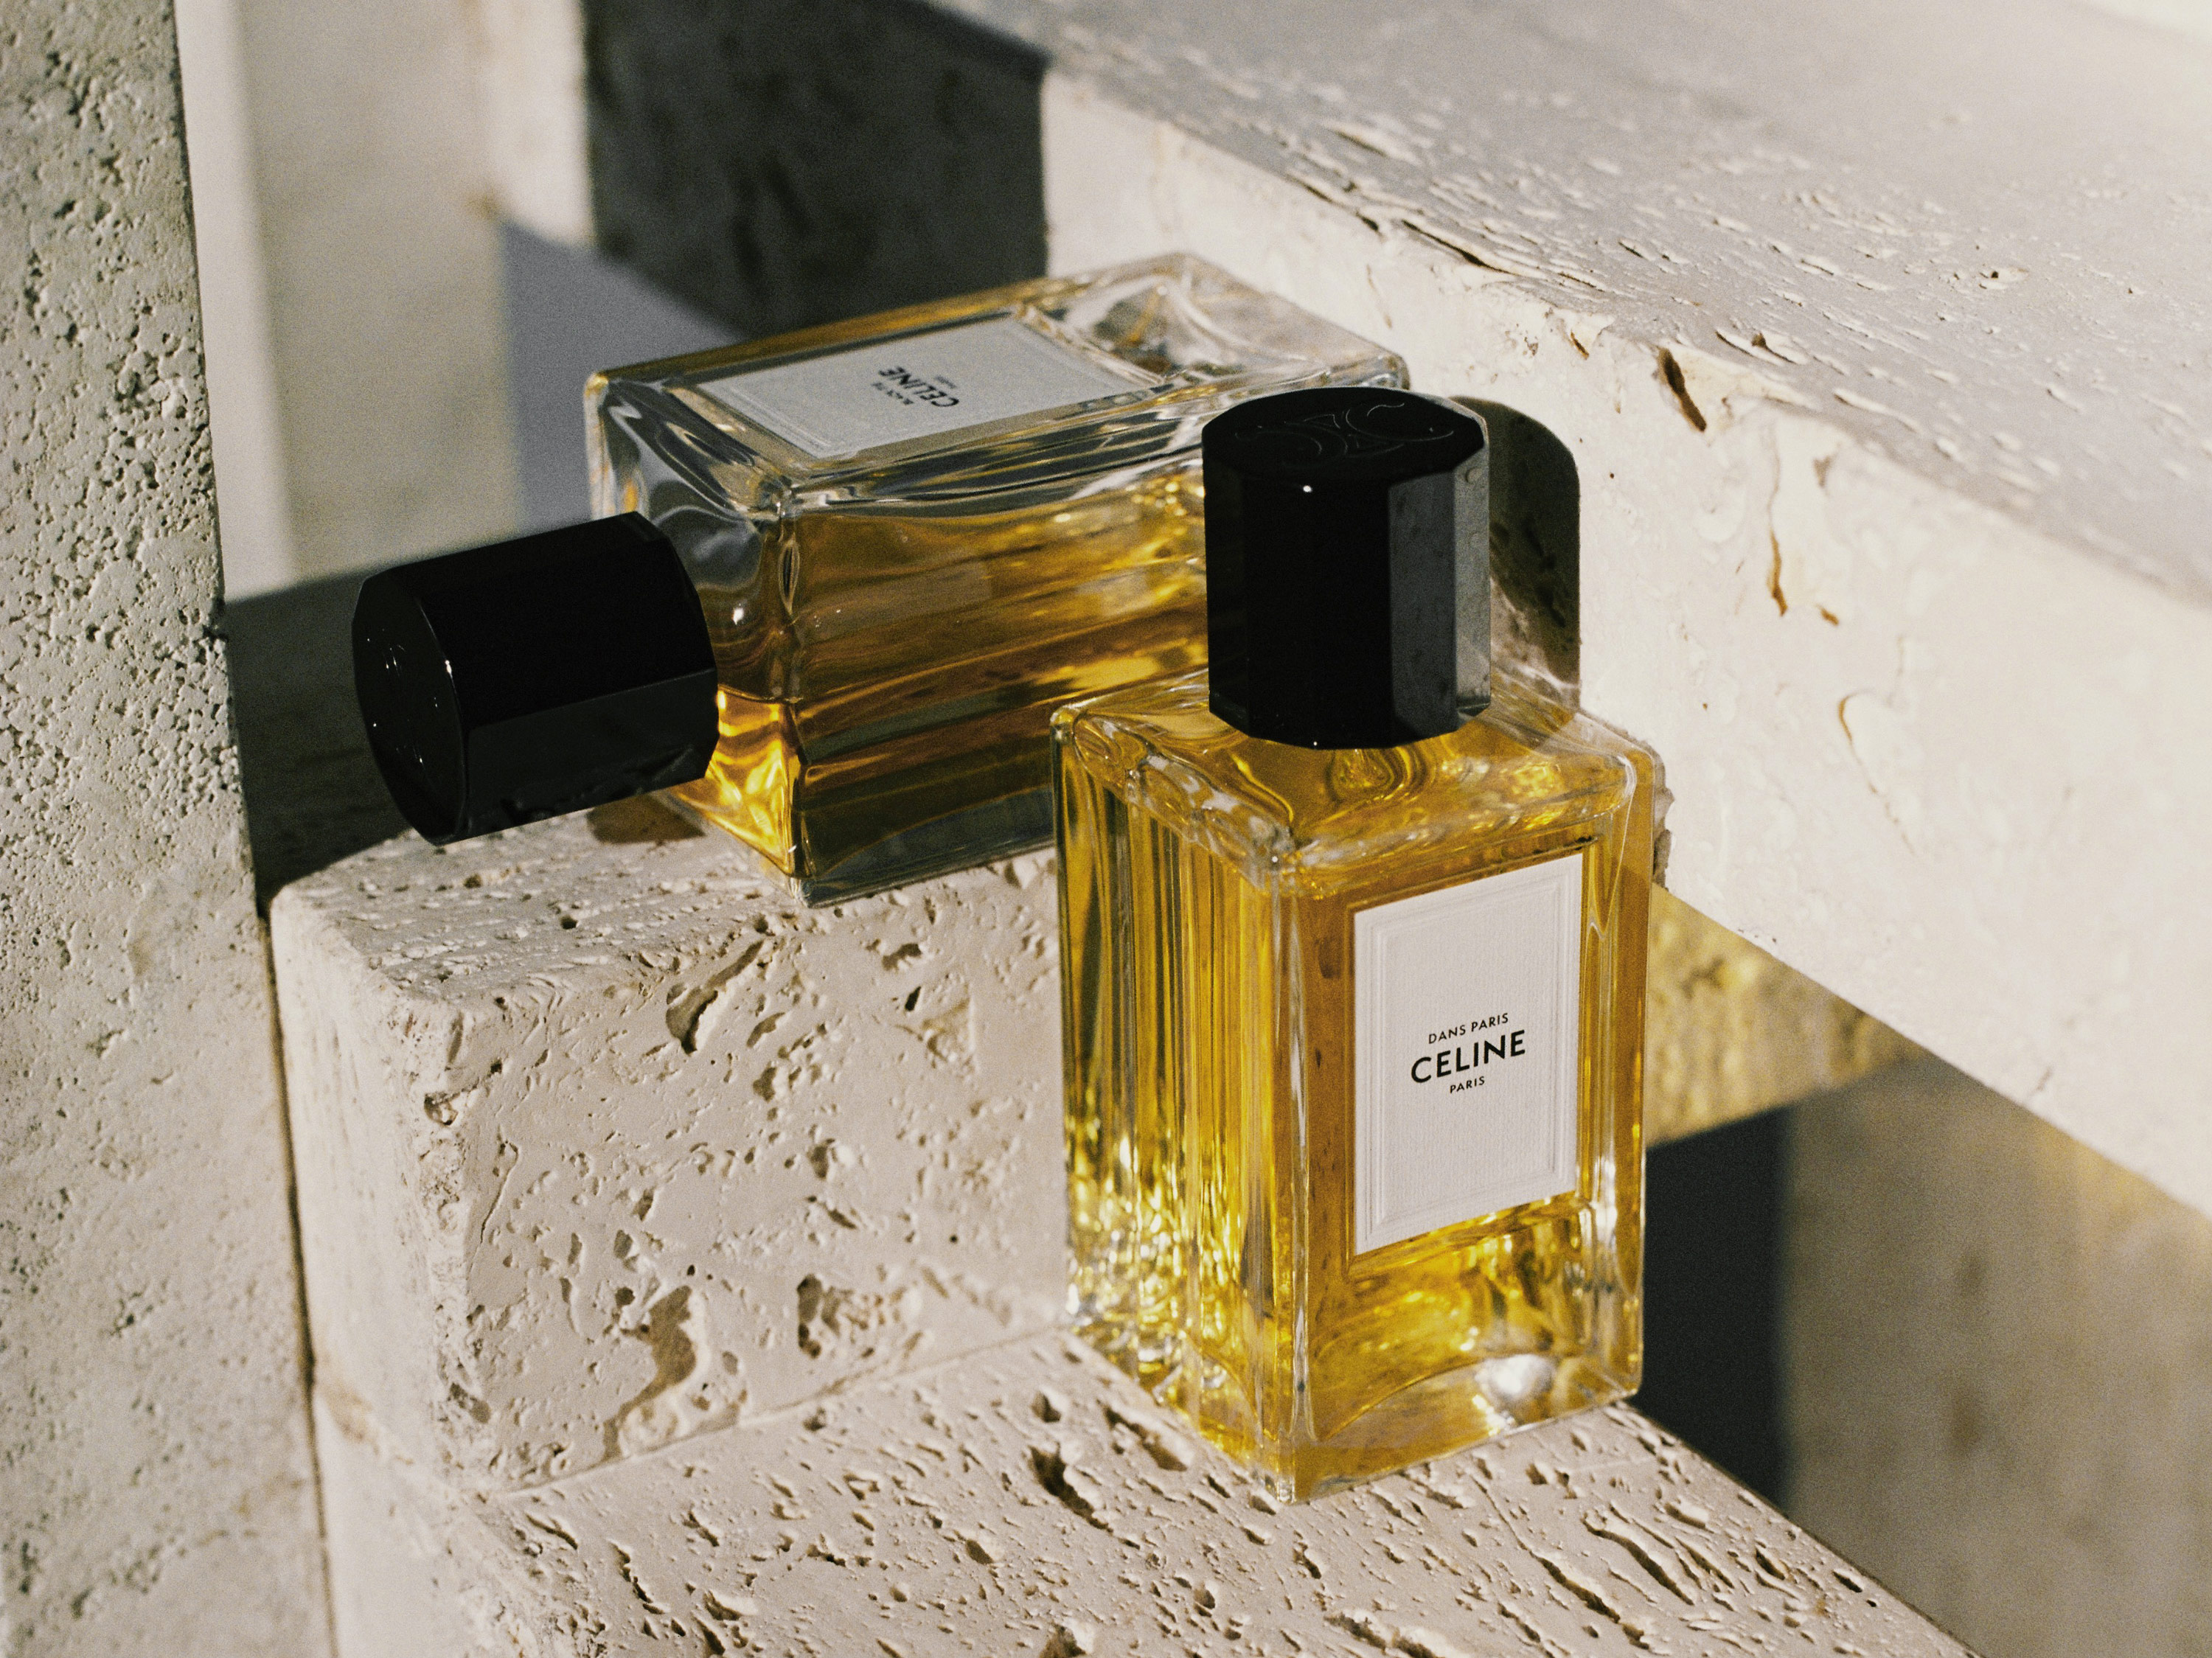 CELINE HAUTE PARFUMERIE — A Classic French Perfumery Collection